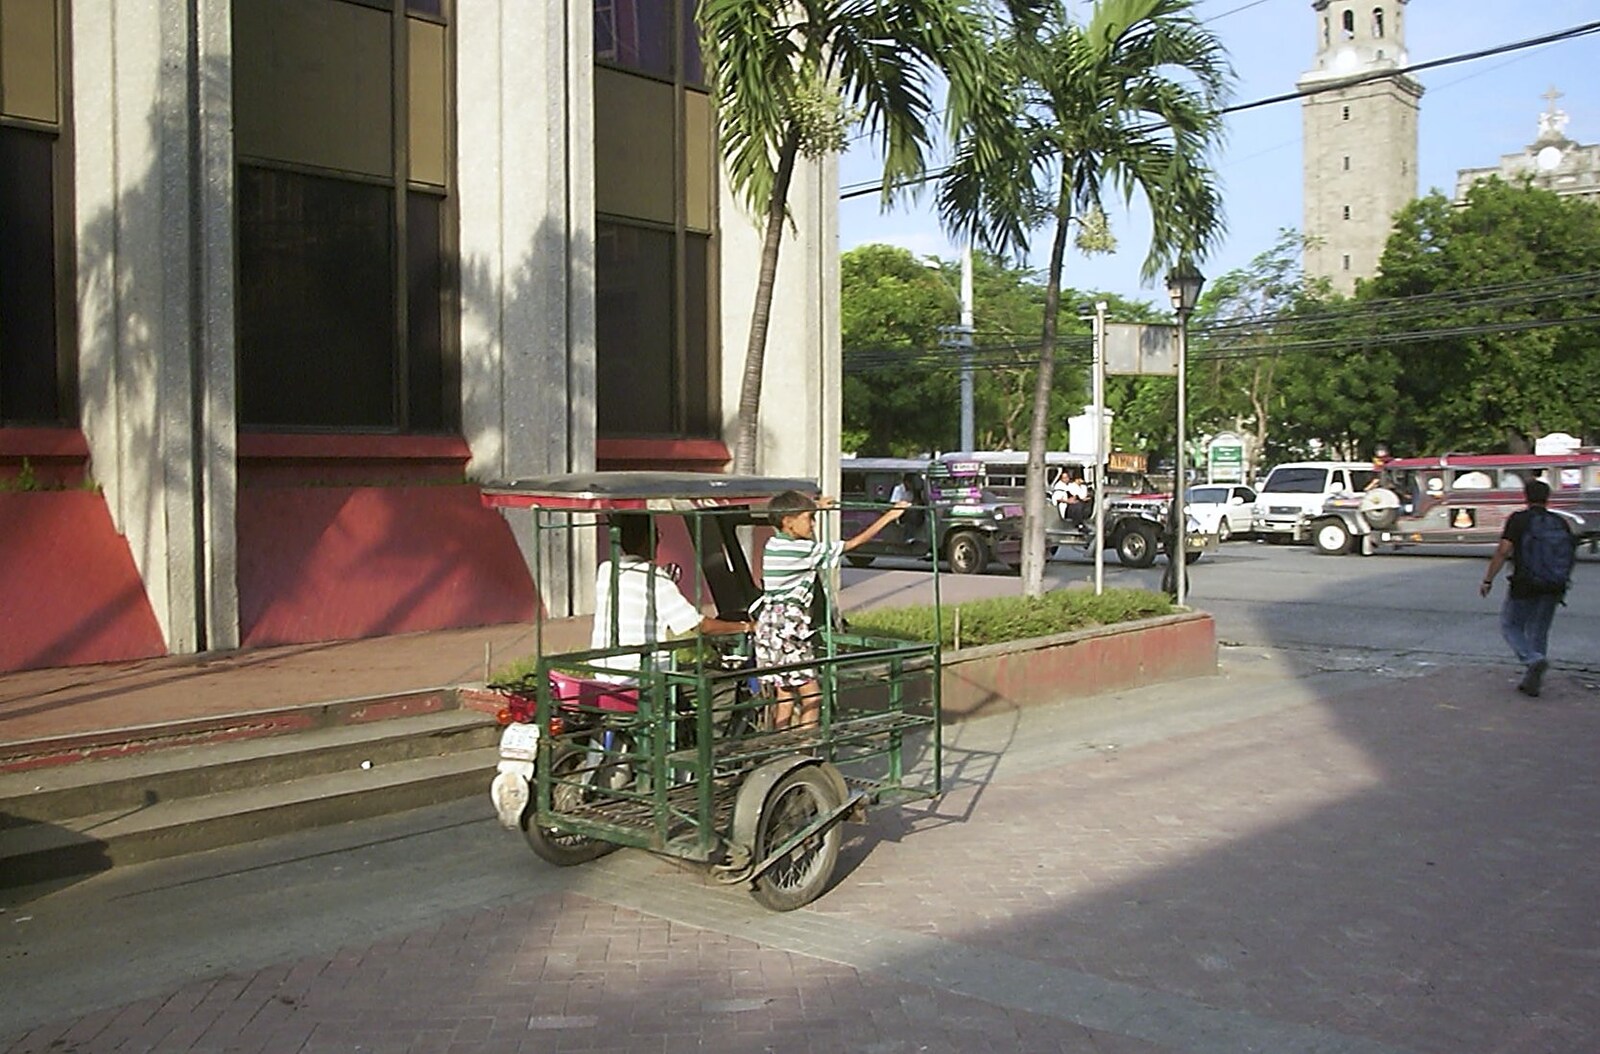 A metal-framed motorbike side car from A Postcard From Manila: a Working Trip, Philippines - 9th July 2004